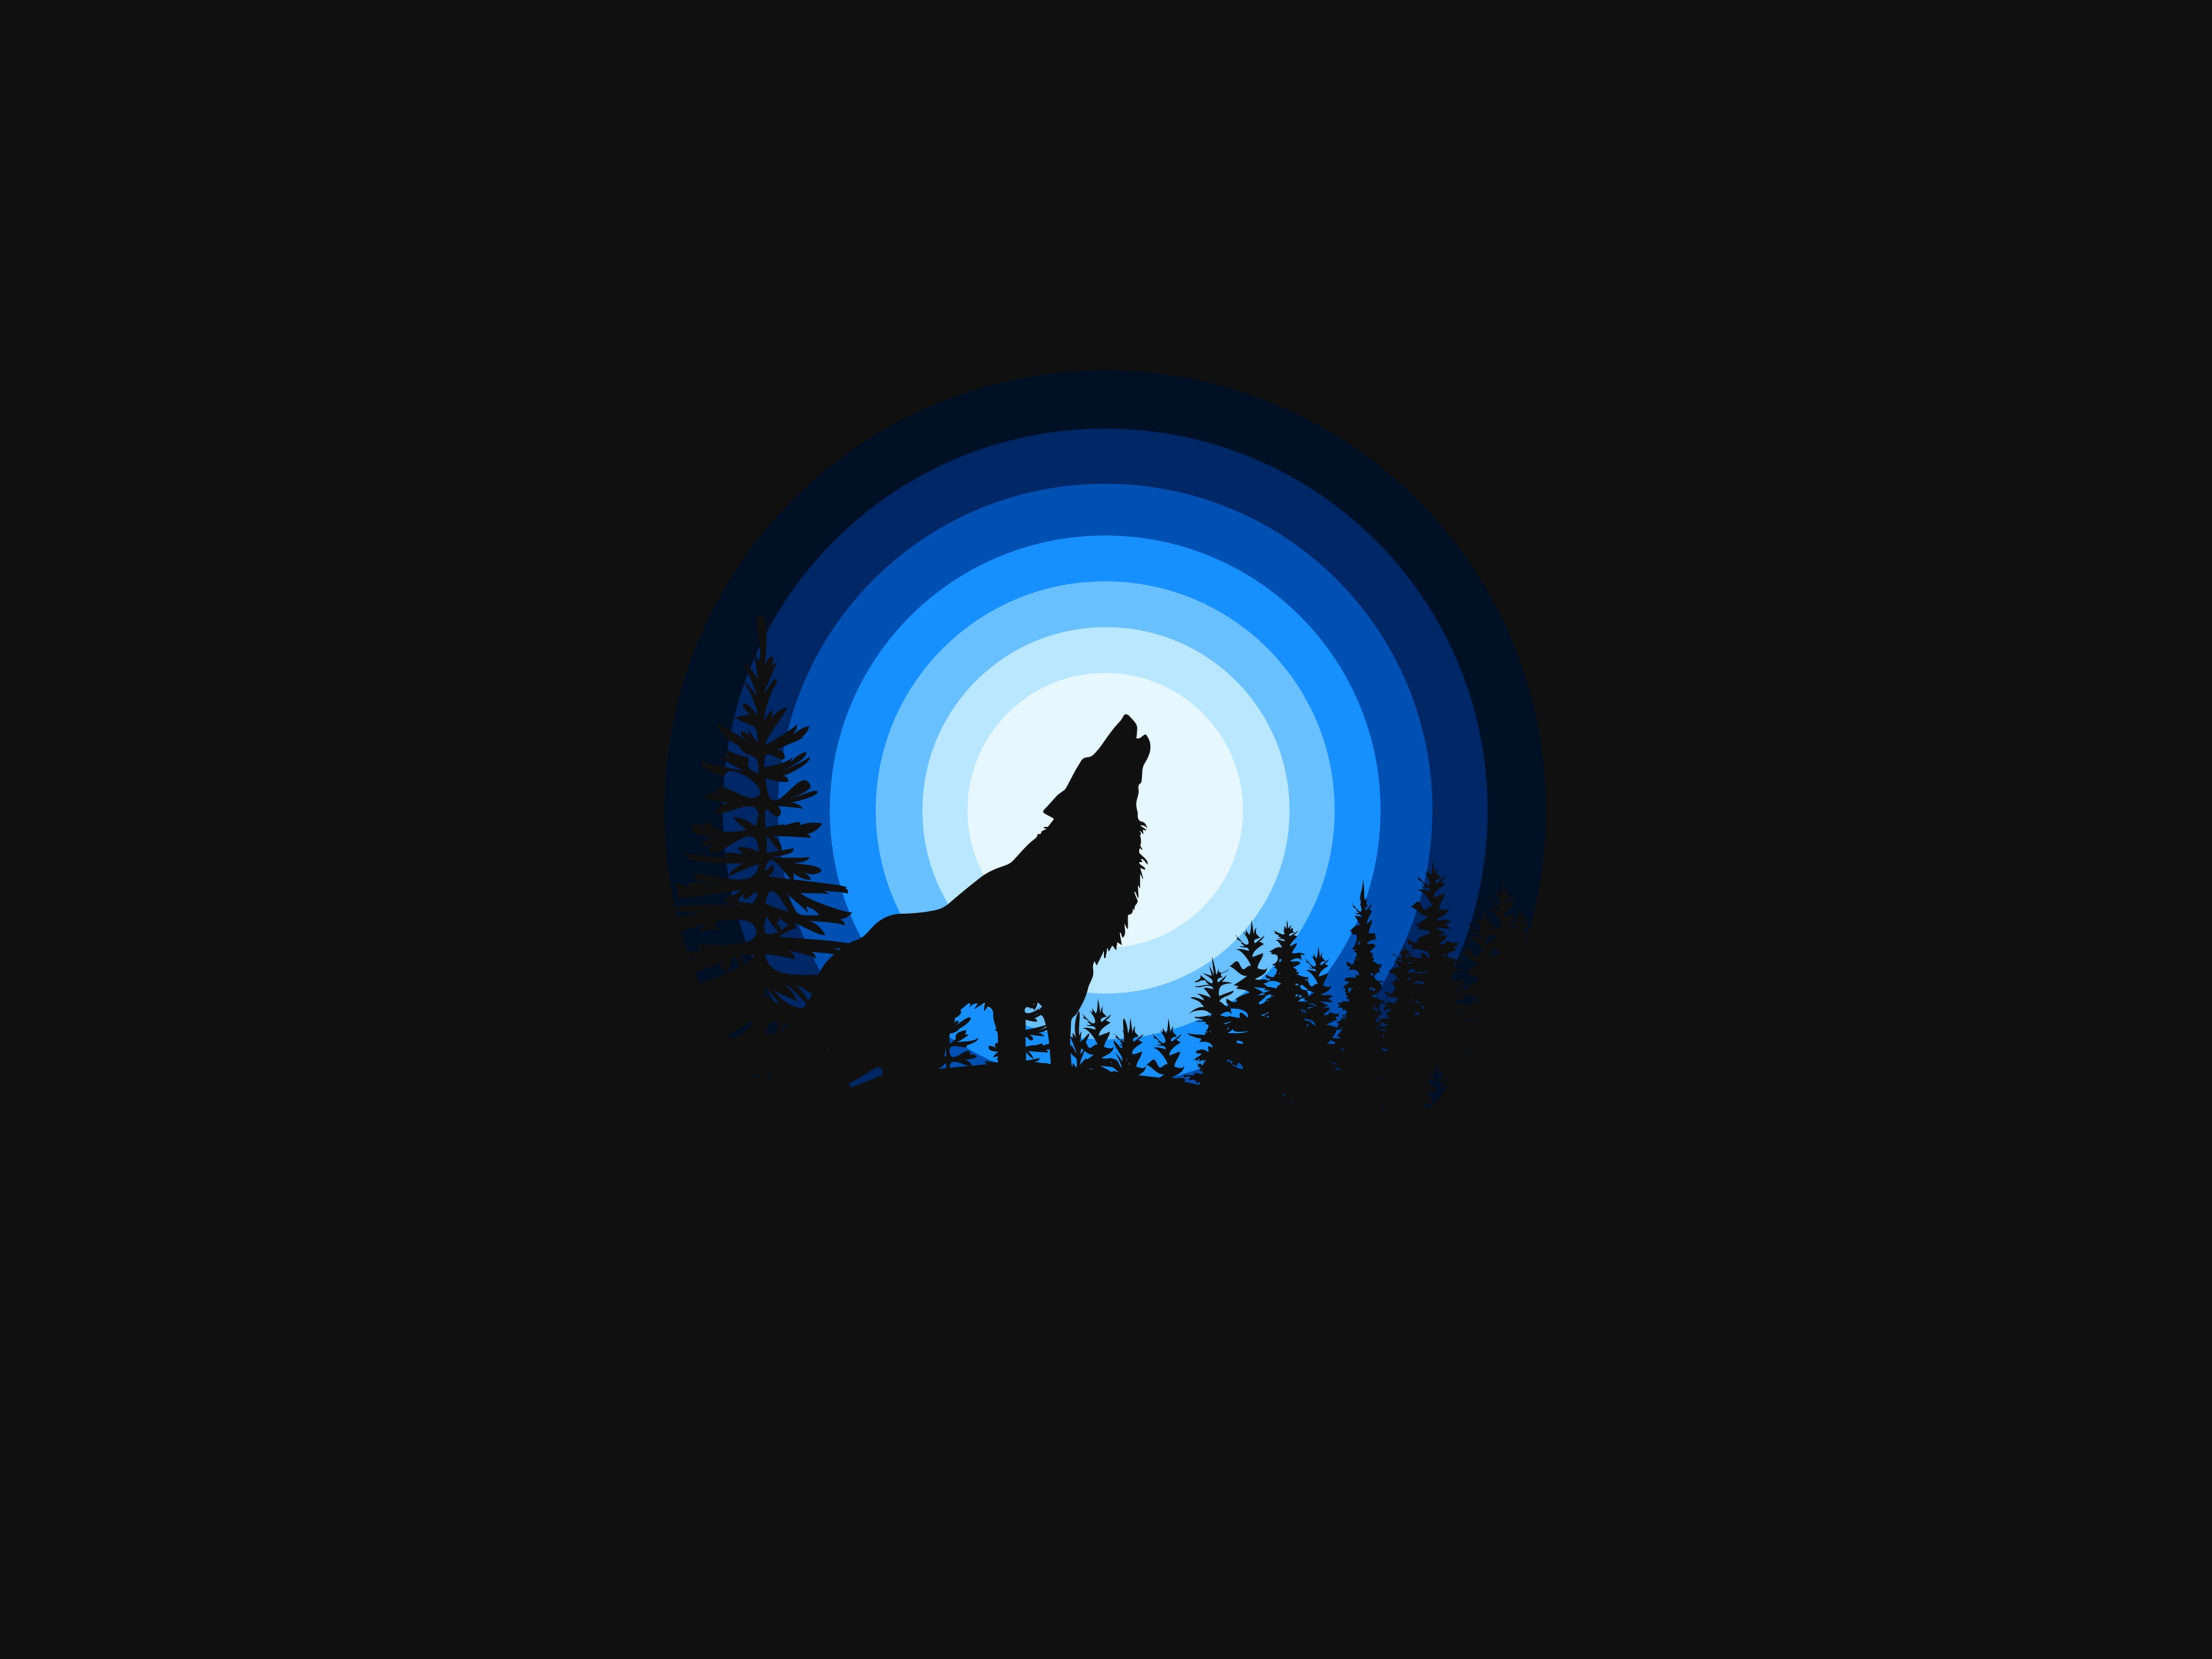 HD wallpaper, Black Background, Howling, Simple, Blue, Silhouette, Wolf